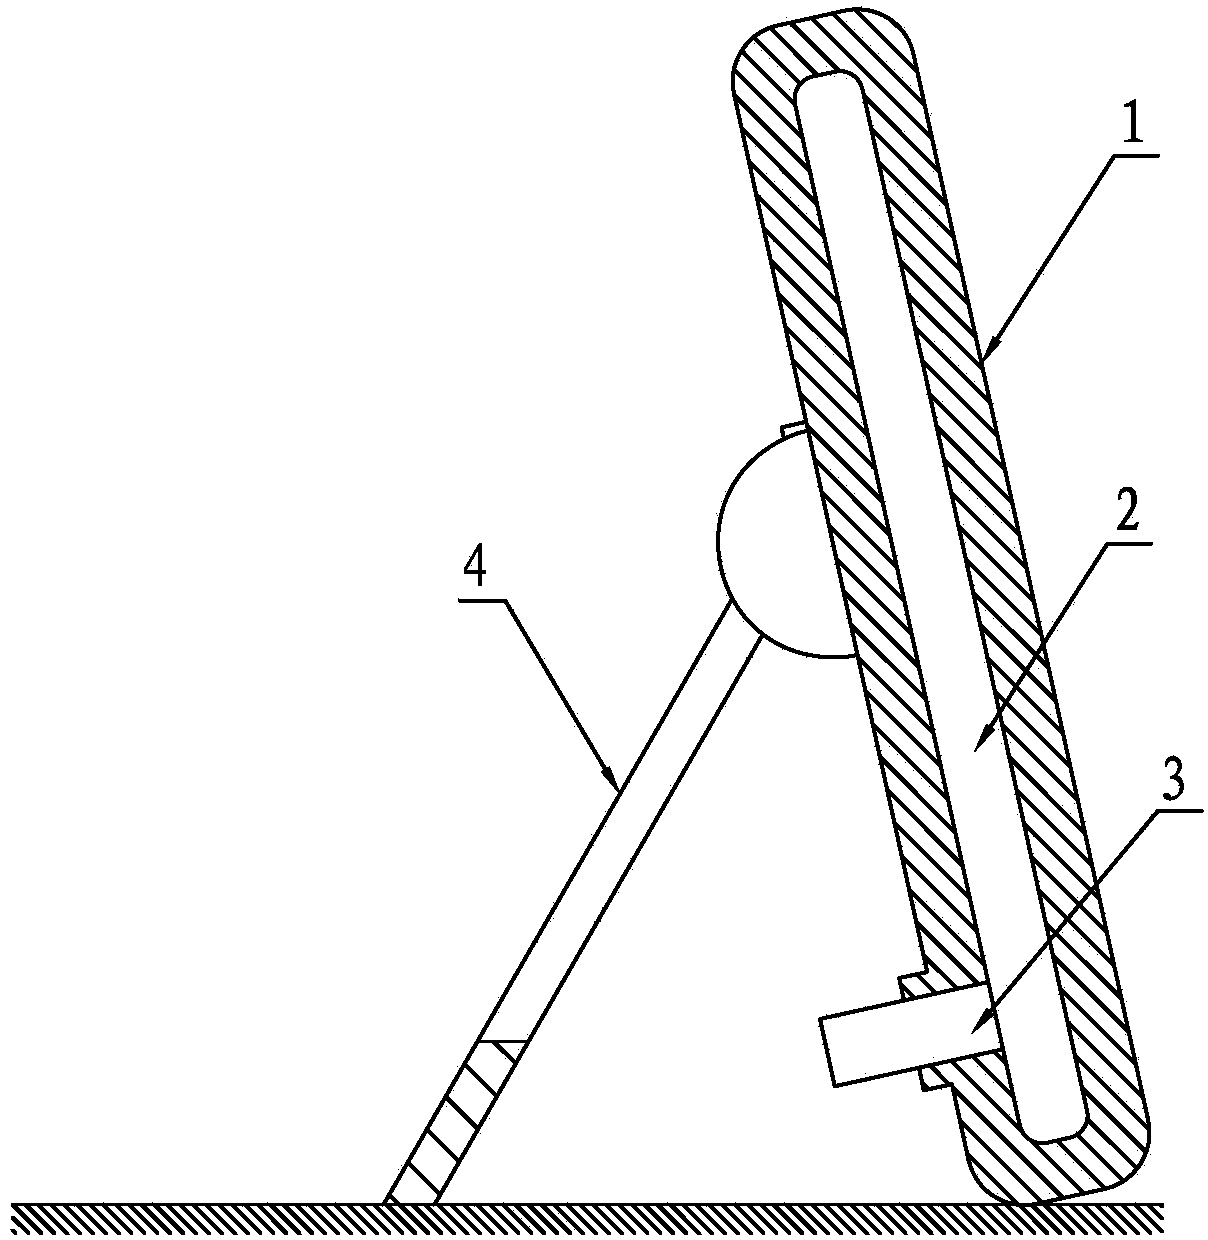 Digital television signal receiving device